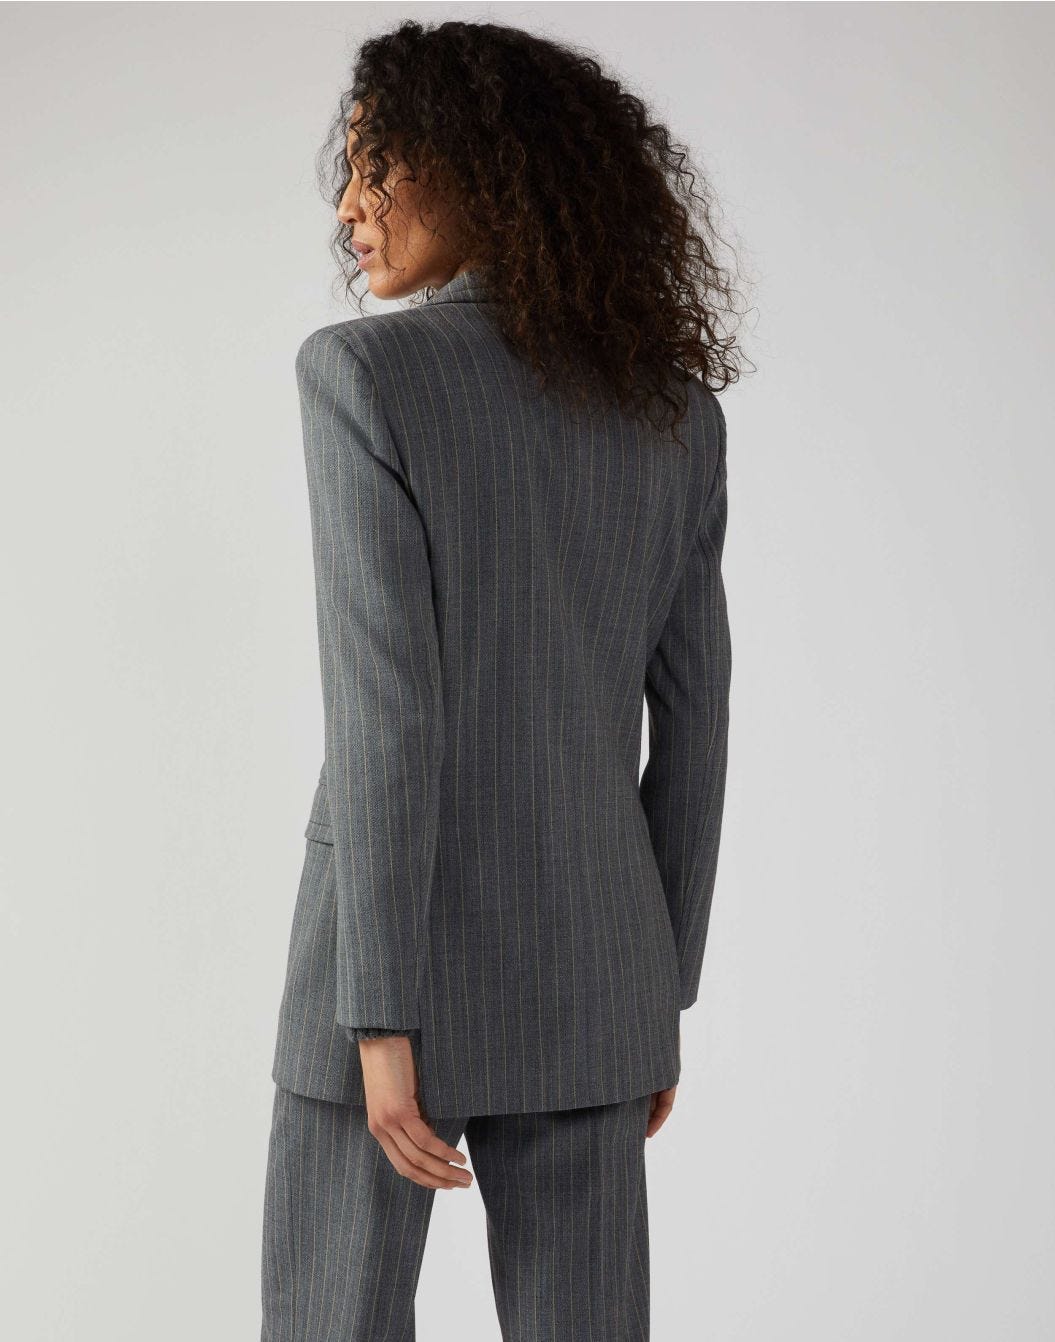 Single-breasted pinstripe jacket in grey and beige 